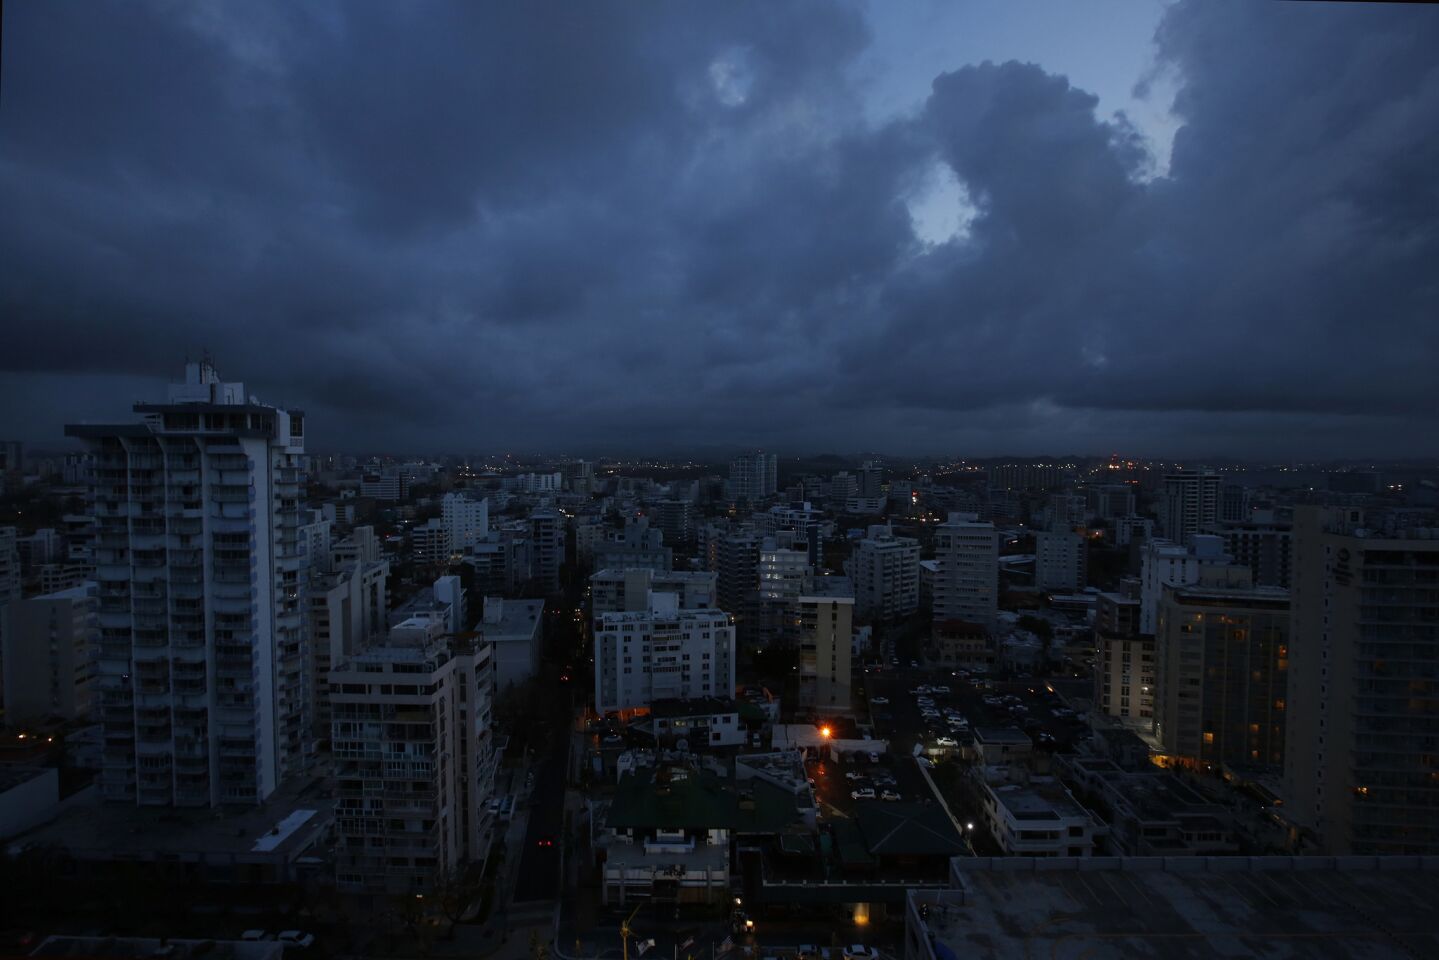 Darkness falls on downtown San Juan which remains without power. Puerto Rico officials say it will likely be four to six months before power is fully restored across the U.S. territory of 3.5 million people.